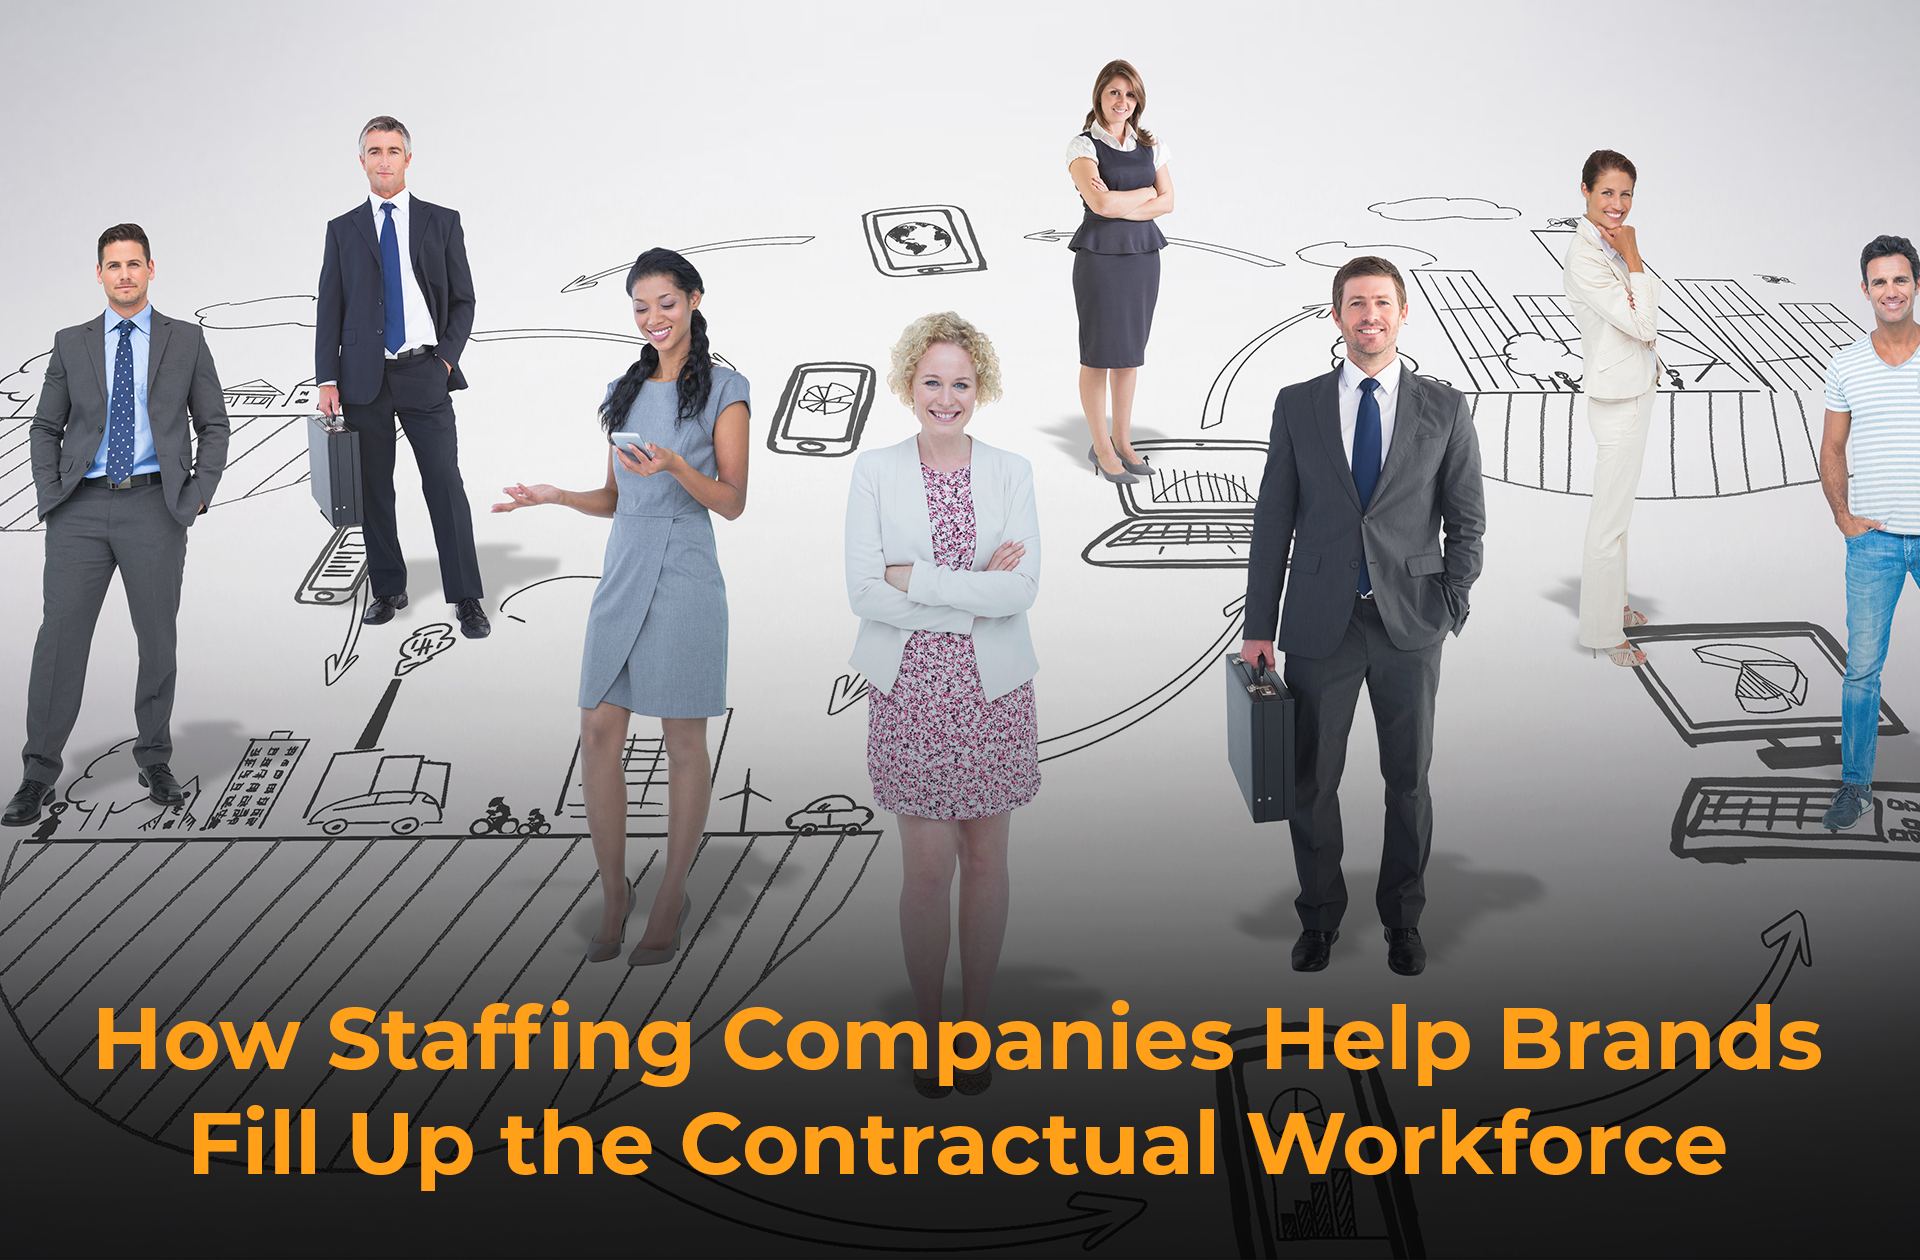 How Staffing Companies Help Brands Fill Up the Contractual Workforce